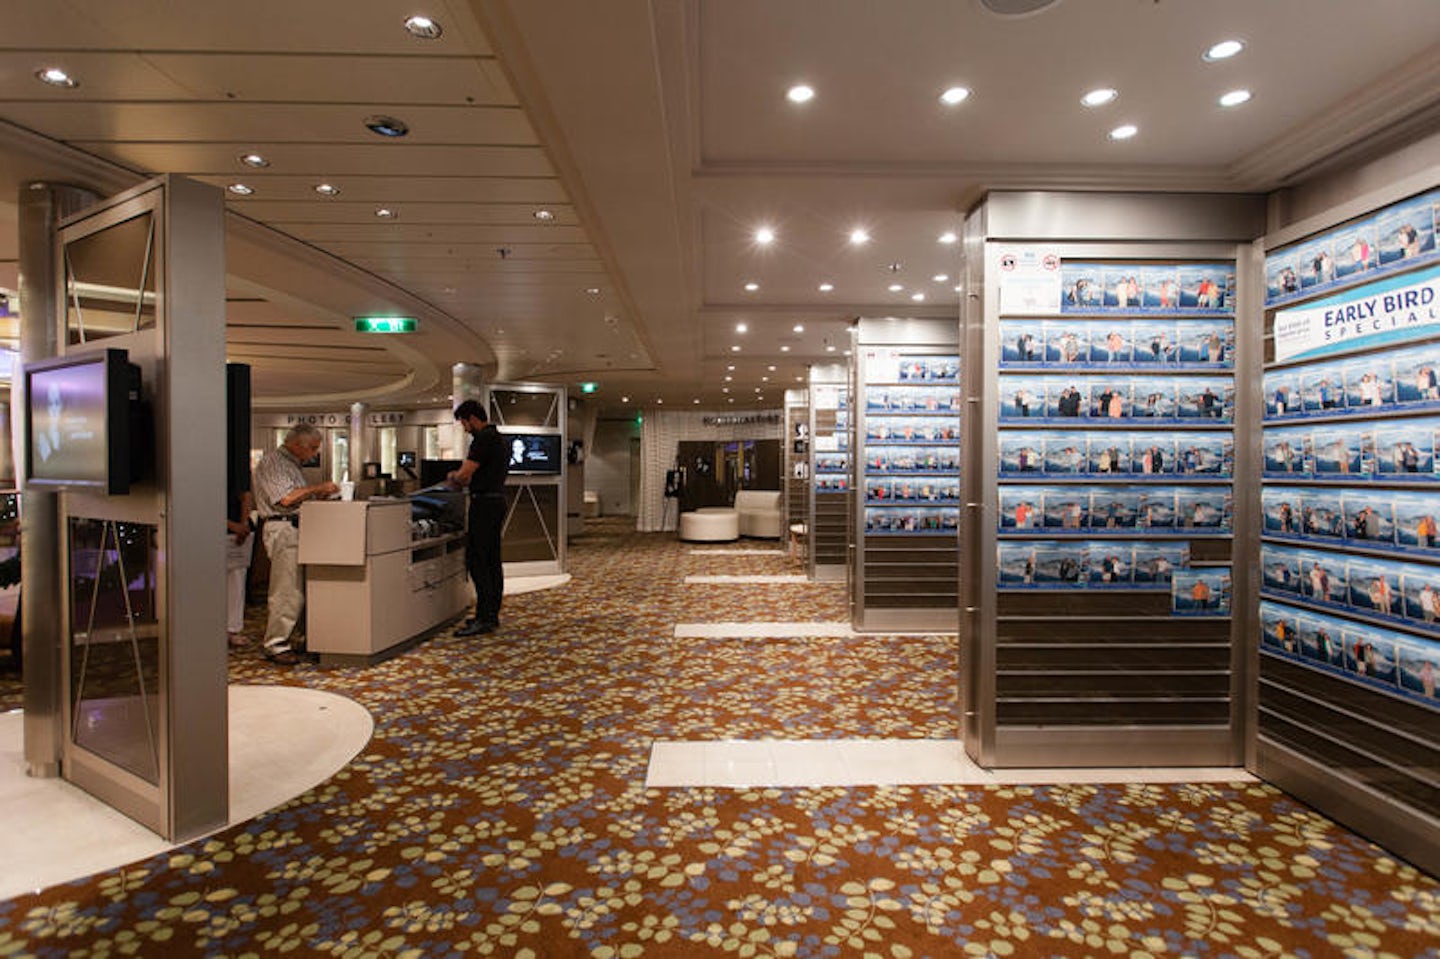 Photo Gallery on Celebrity Silhouette